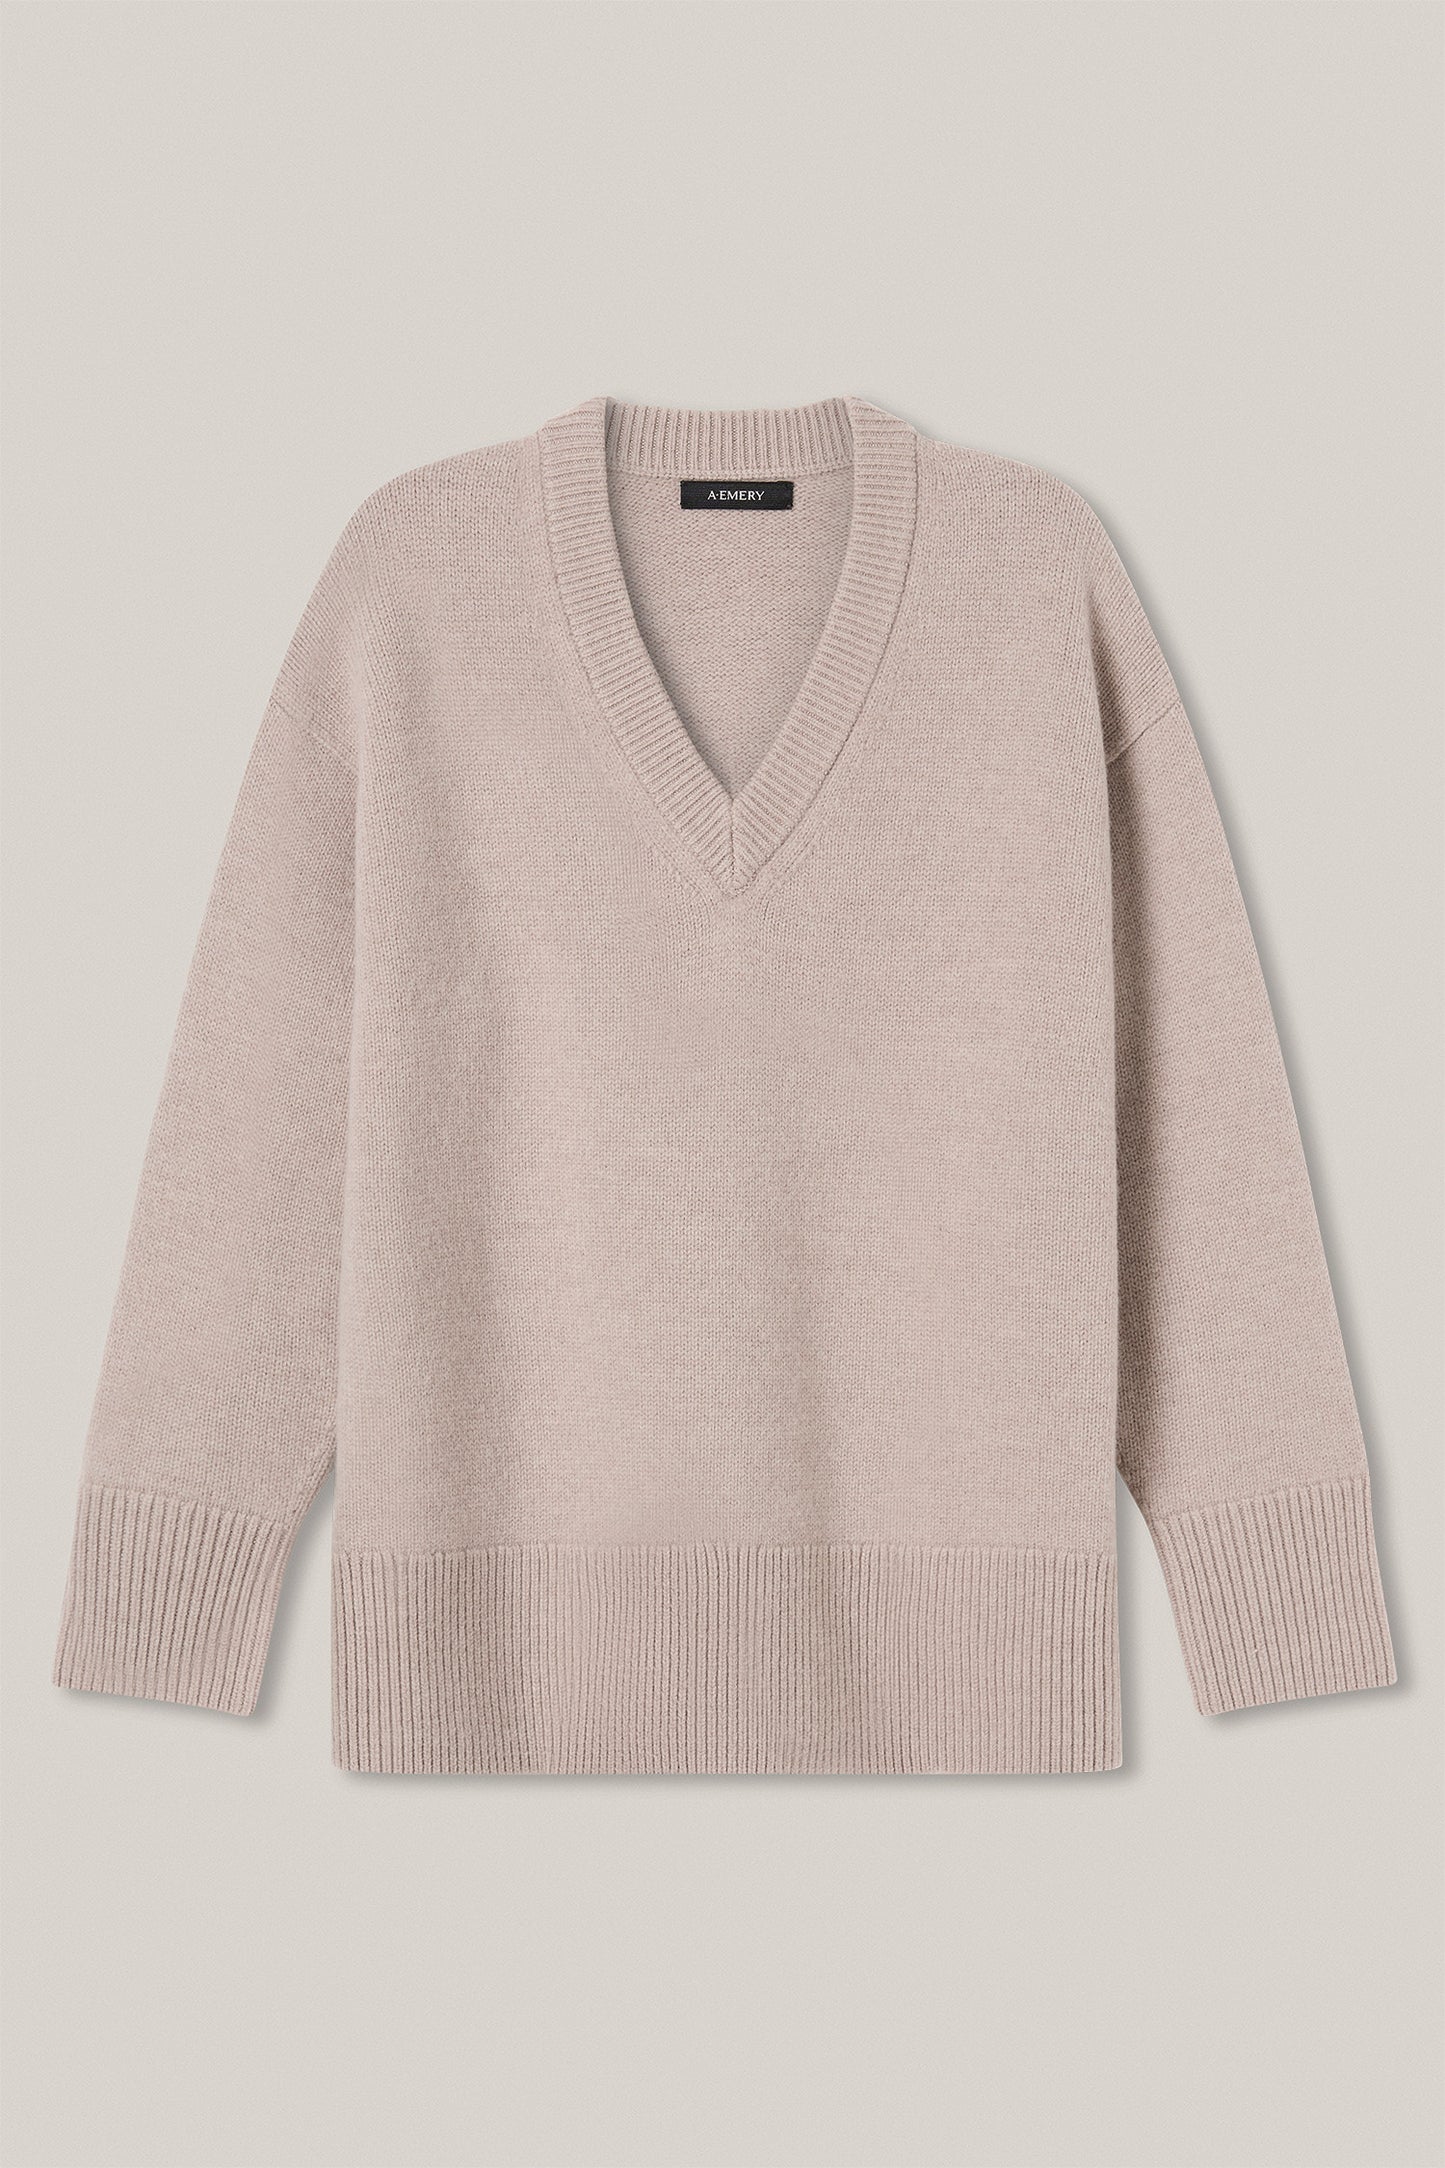 The Lewis Knit